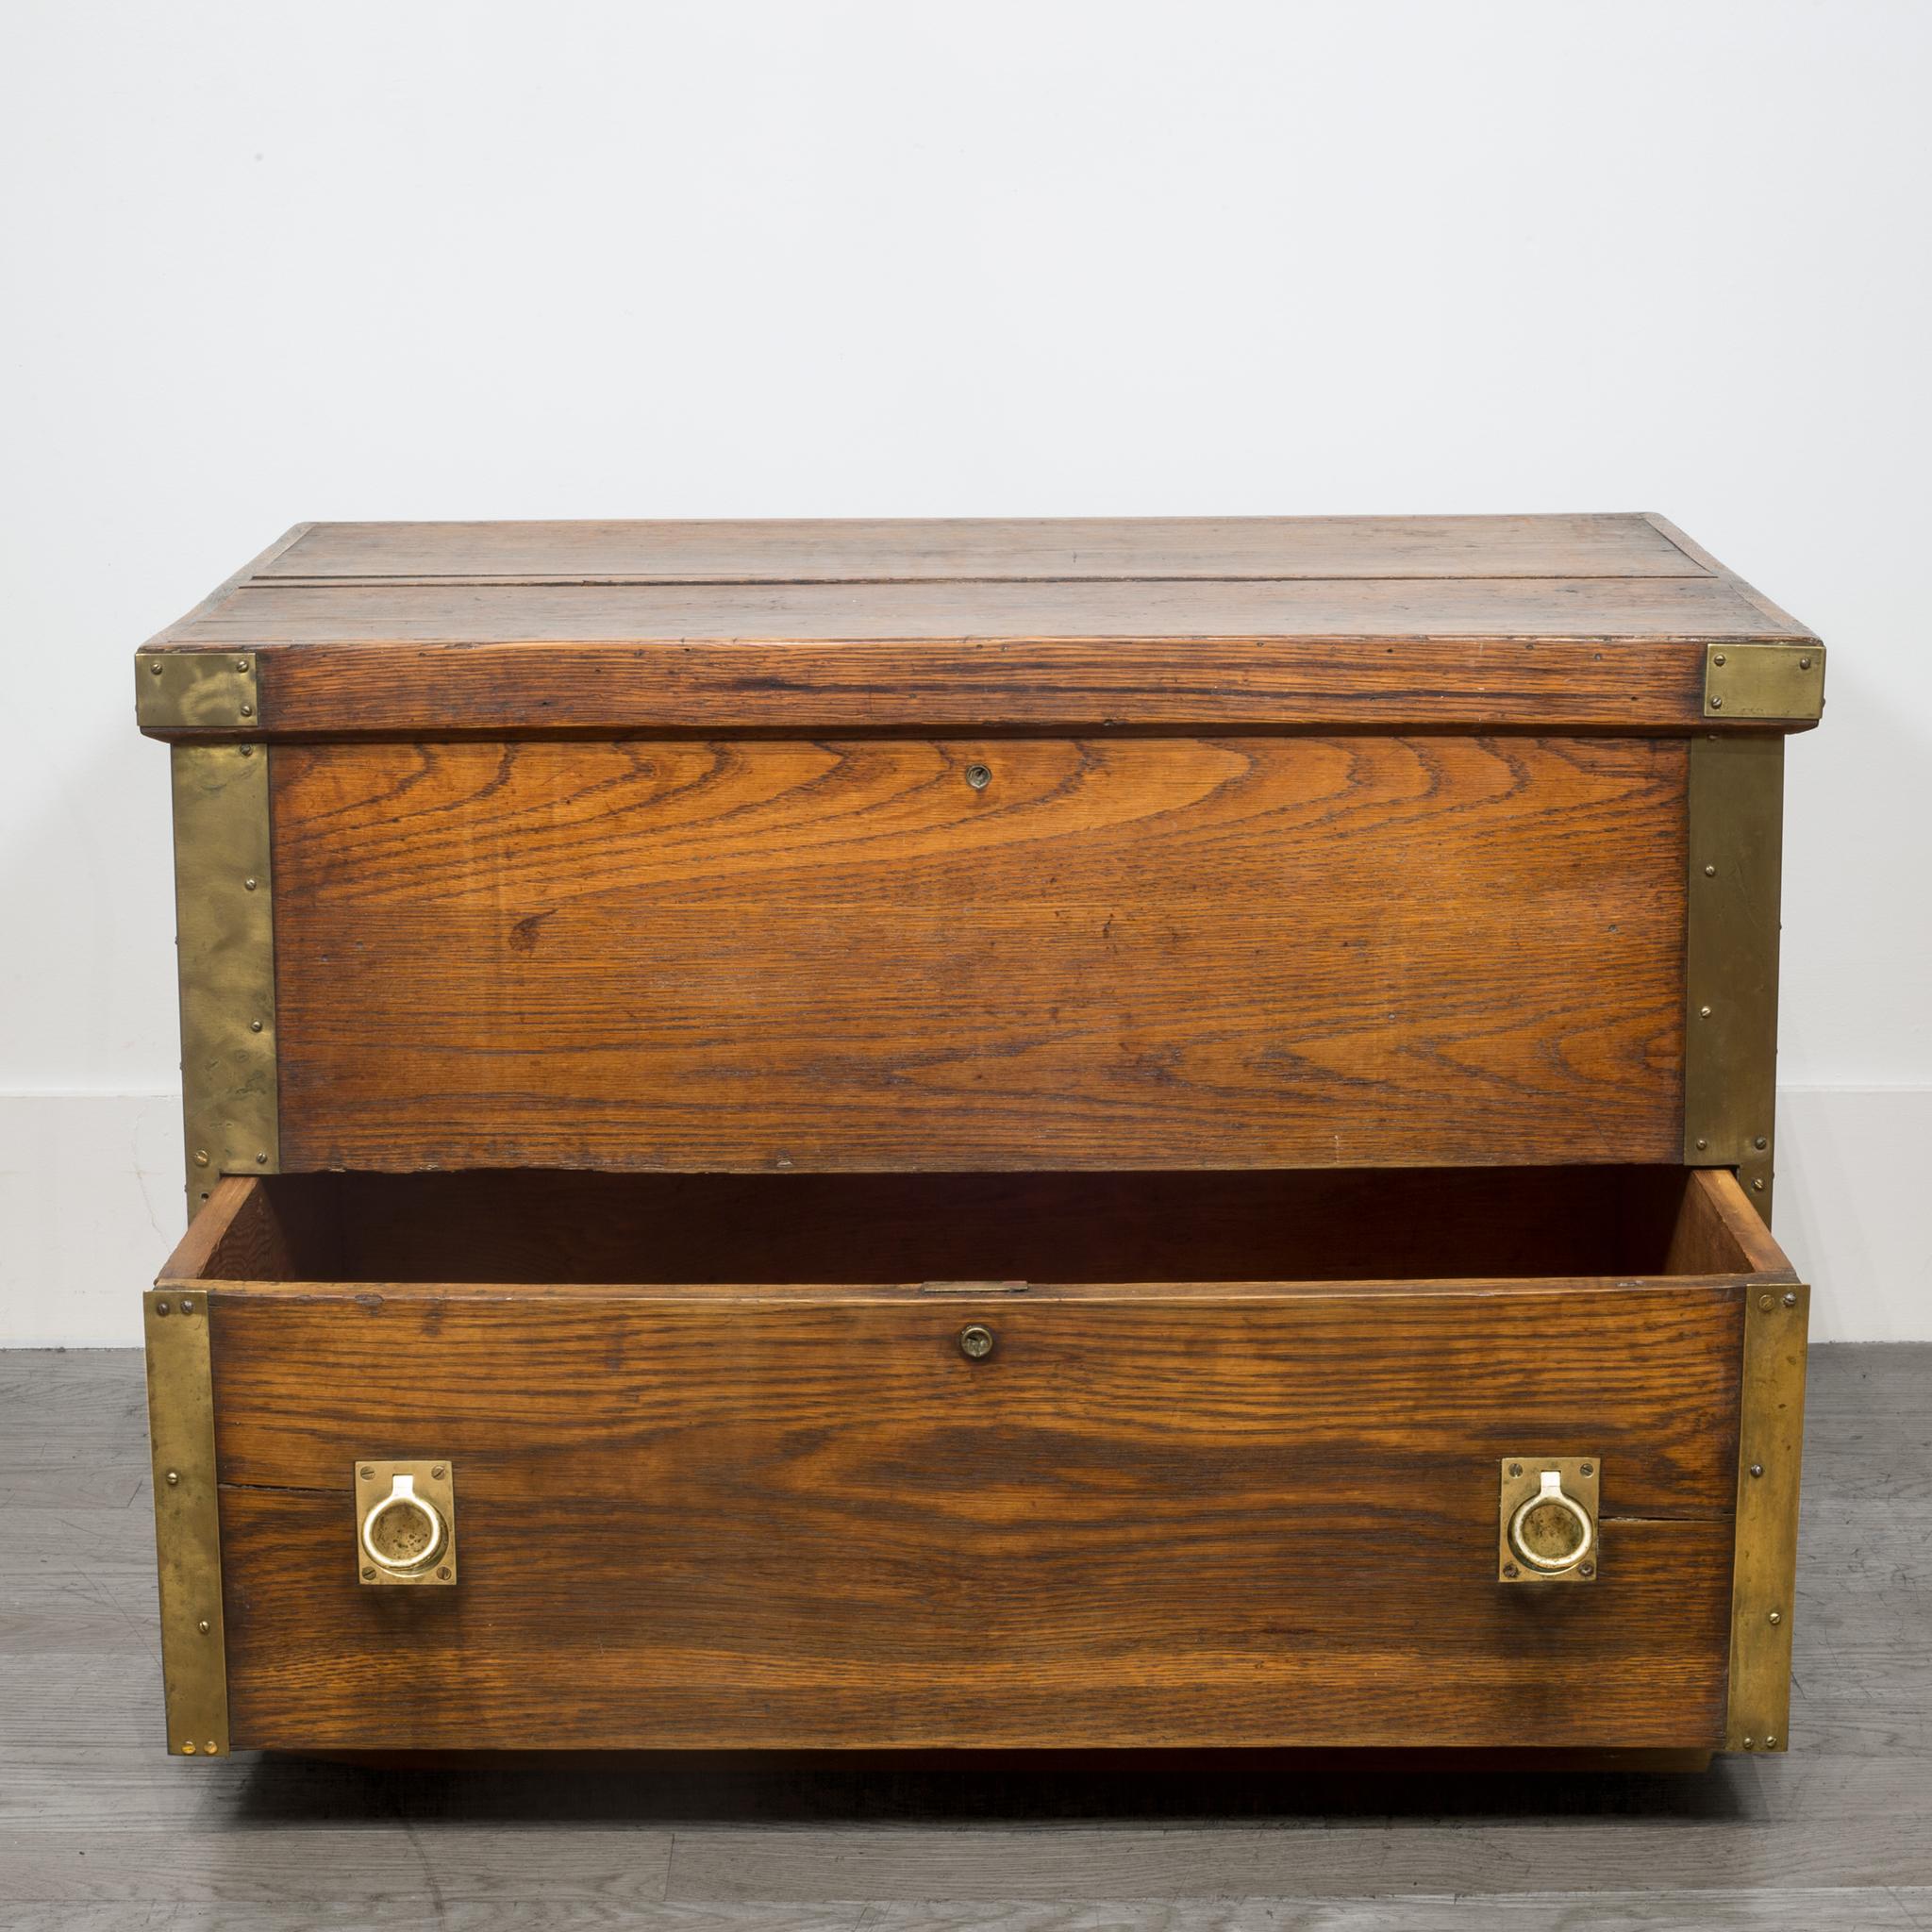 About

This is an English Oak Campaign trunk clad in brass with solid brass handles on the sides and brass pulls in the front. The top lifts up for ample storage with a bottom drawer to store more items. This piece is very solidly constructed and